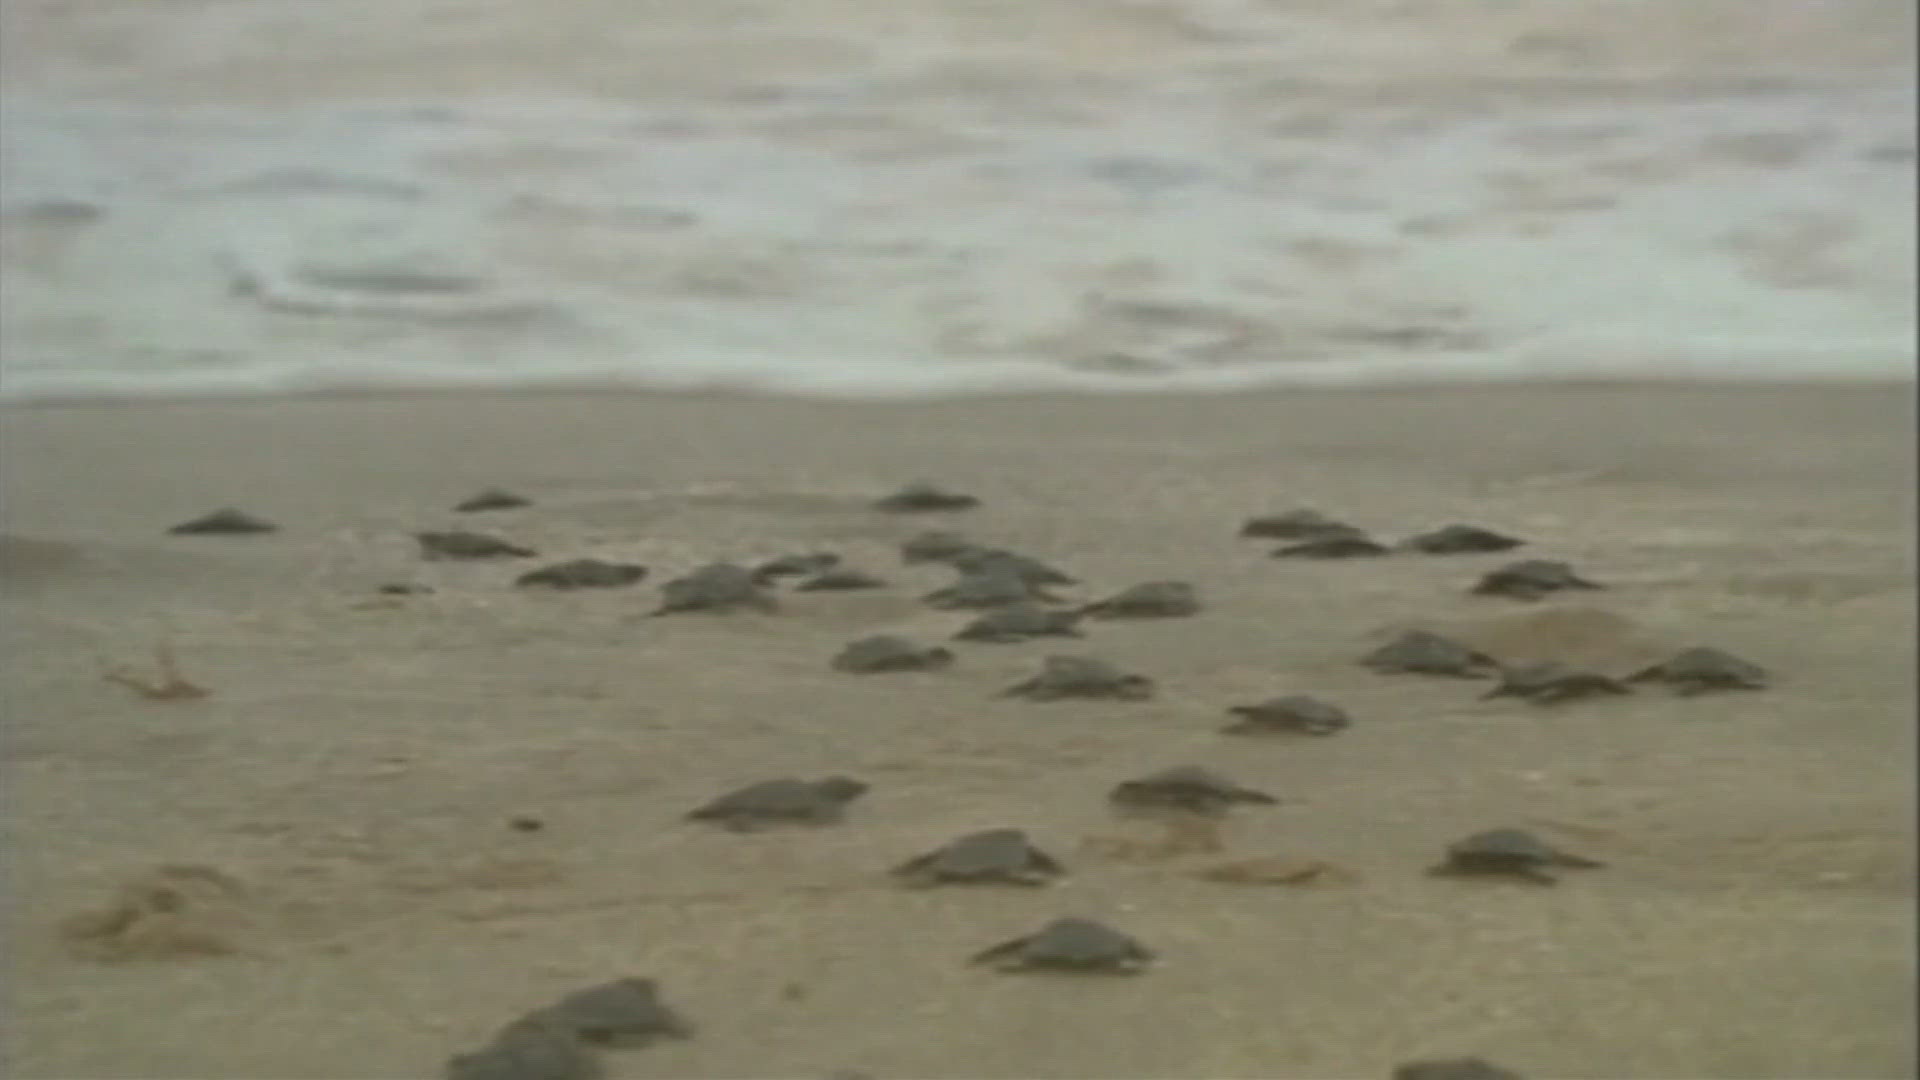 Sea turtle nesting season is from May 1 to Oct. 31 in St. Johns County.